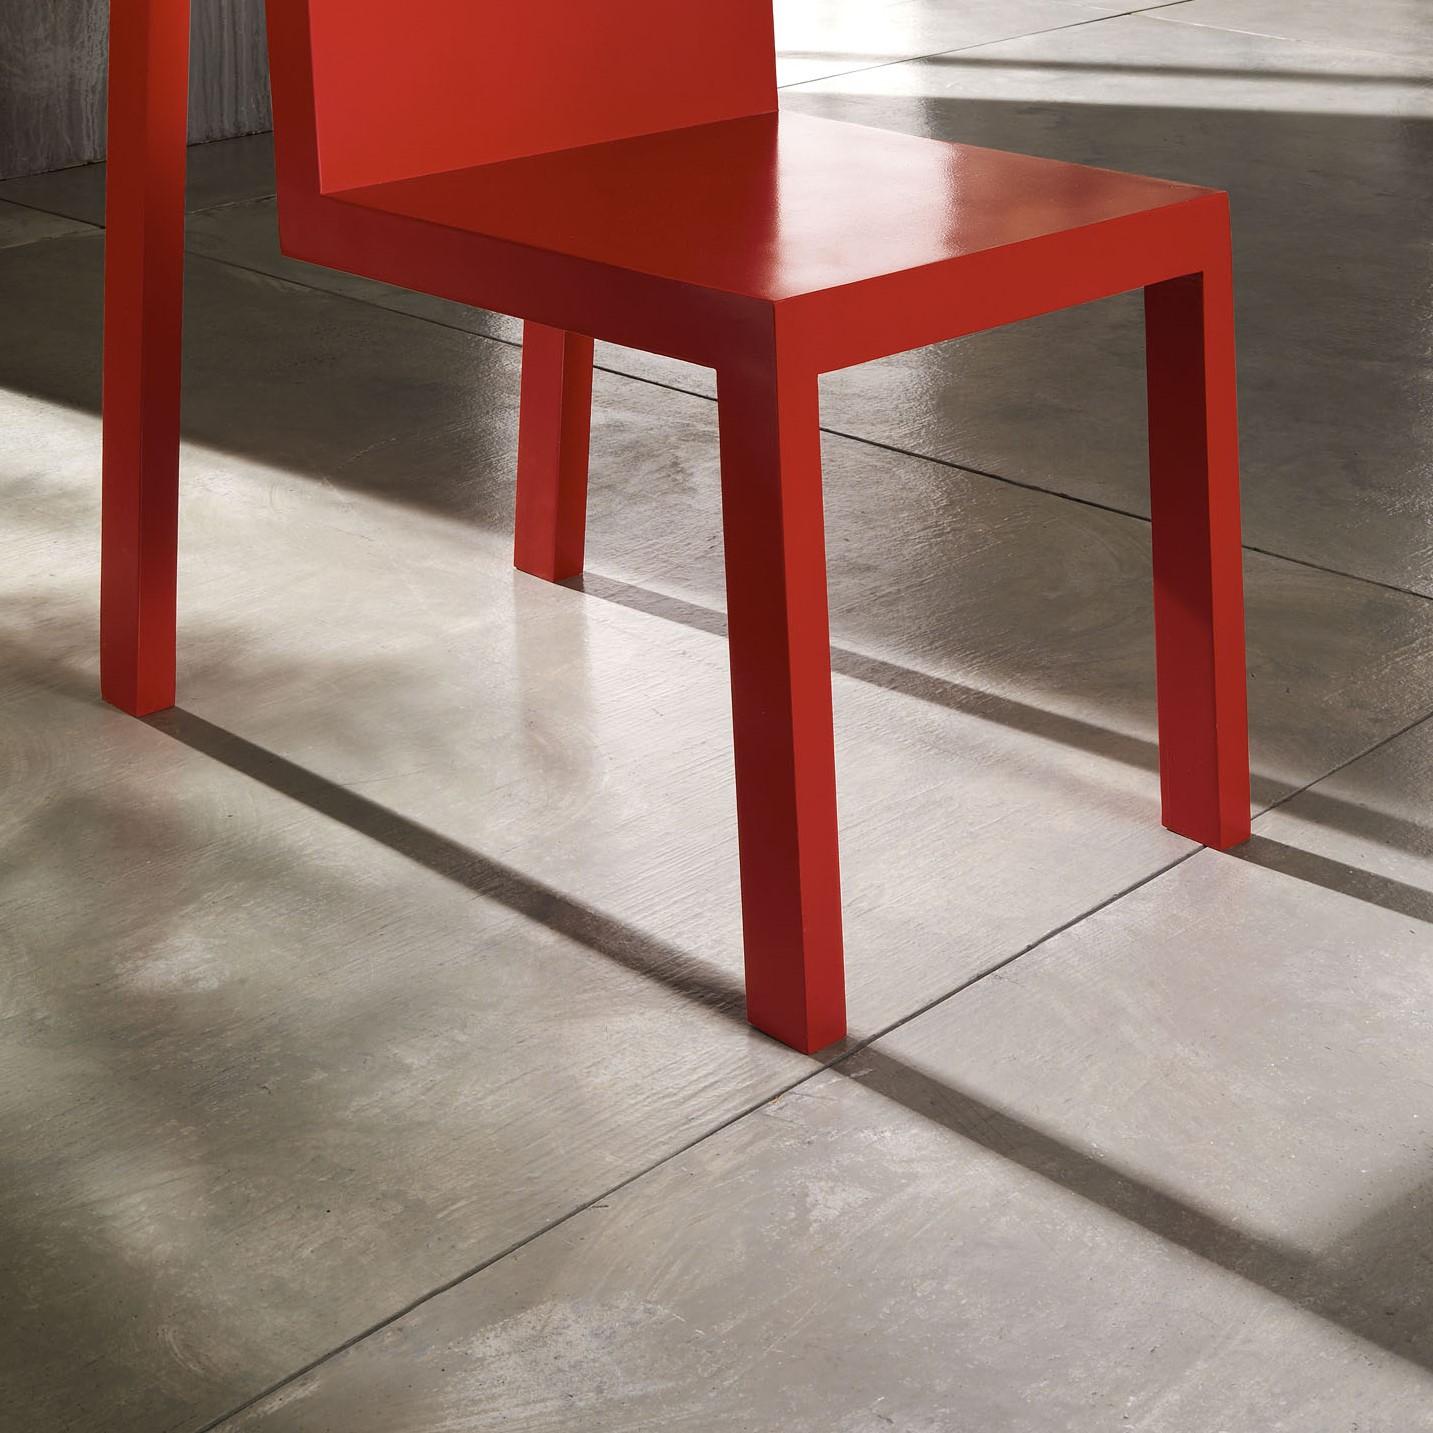 Other Exercice Rouge Chair by Francesco Profili For Sale